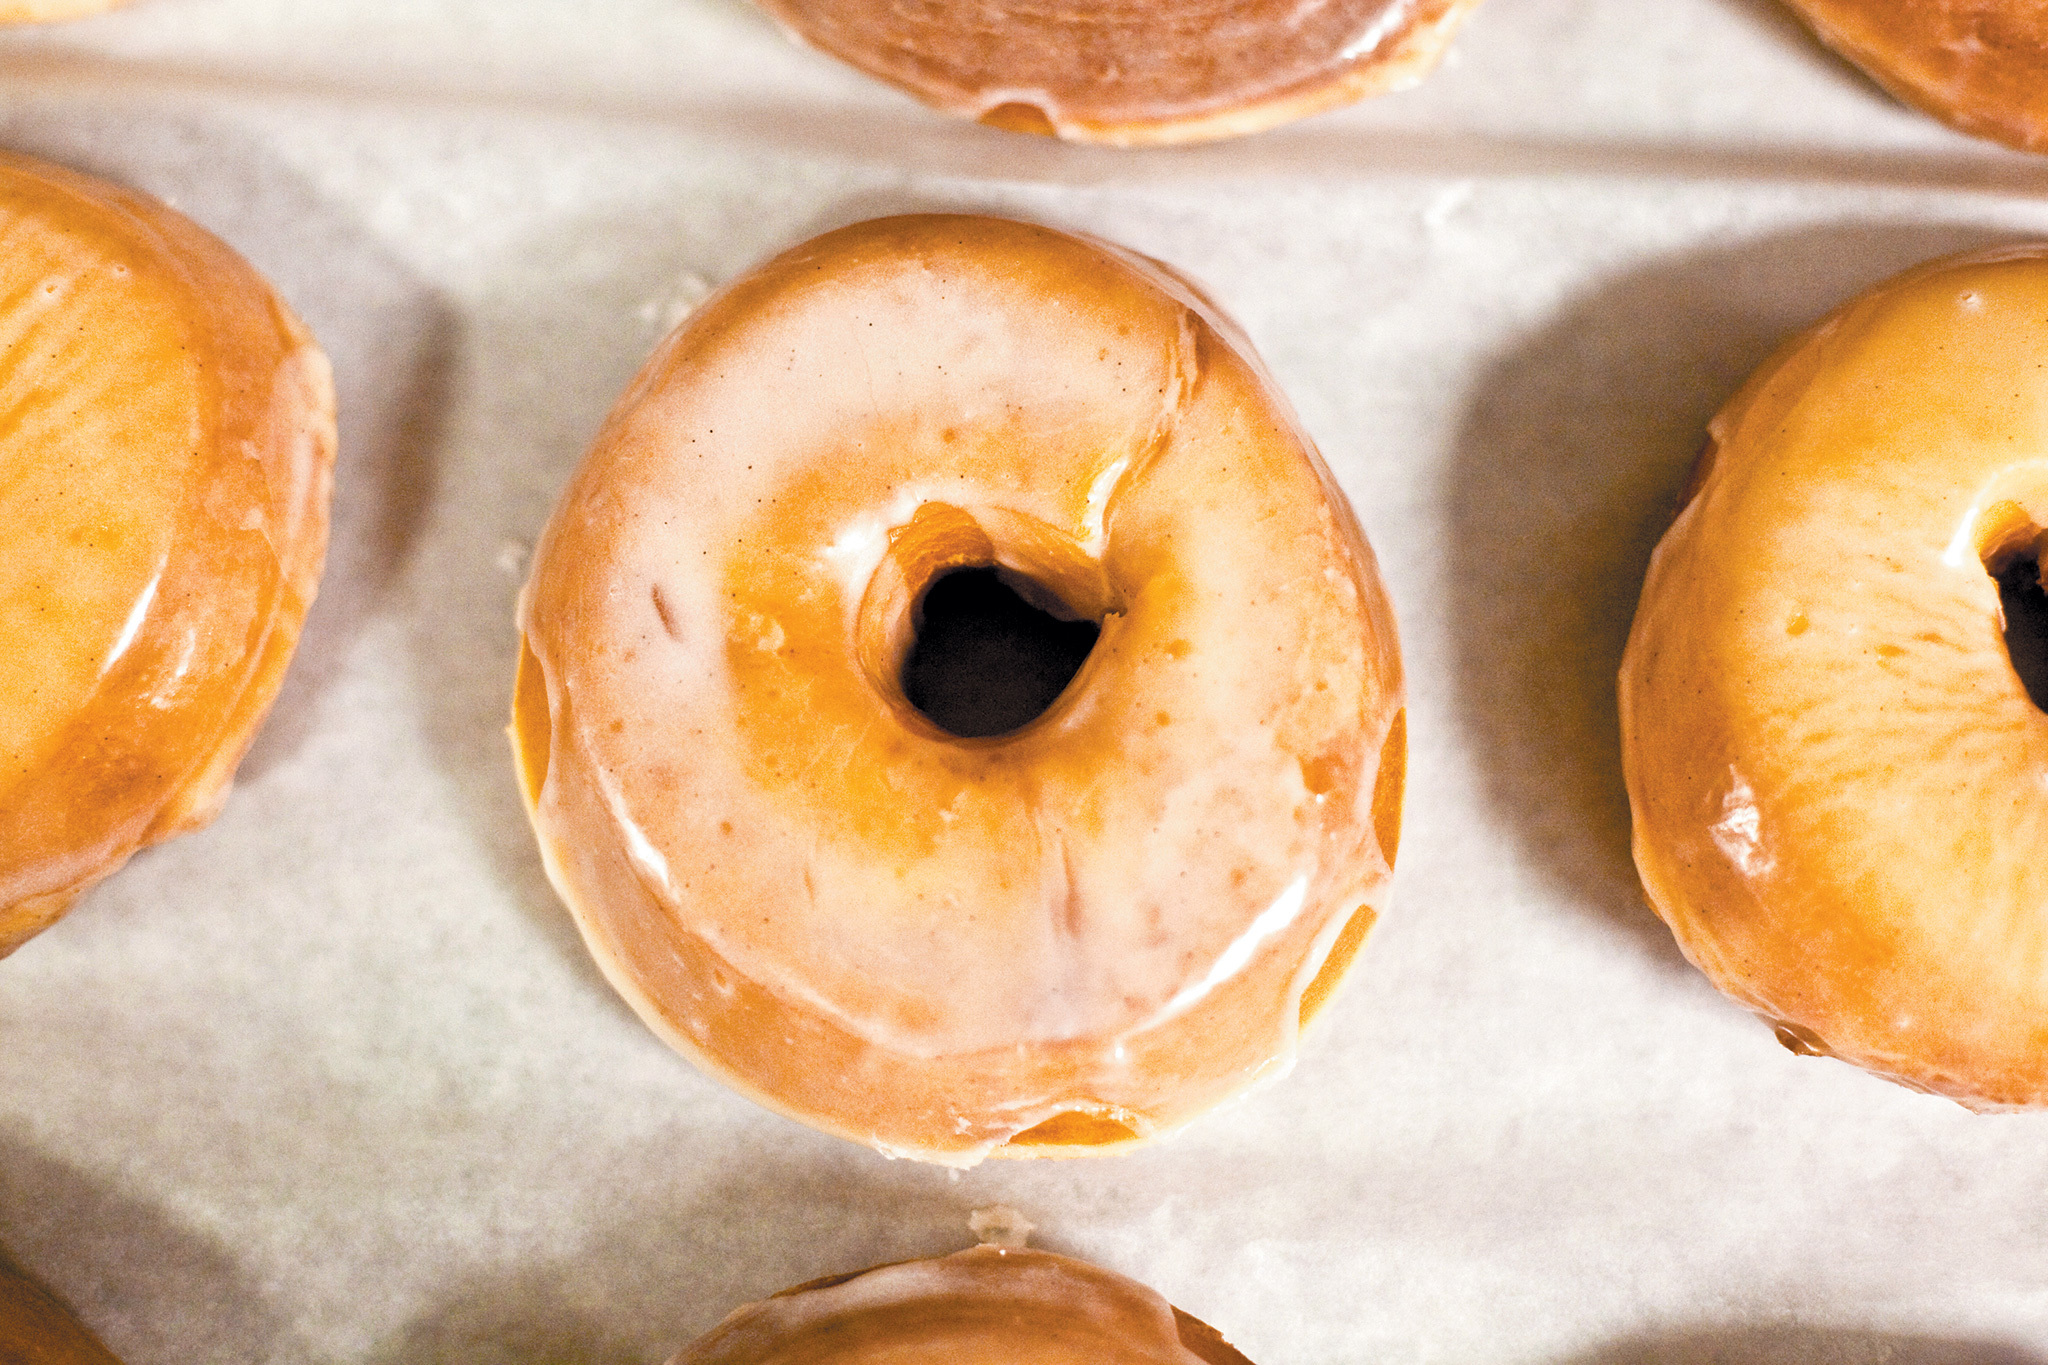 Four Illinois donut shops named in the top 100 in the U.S.